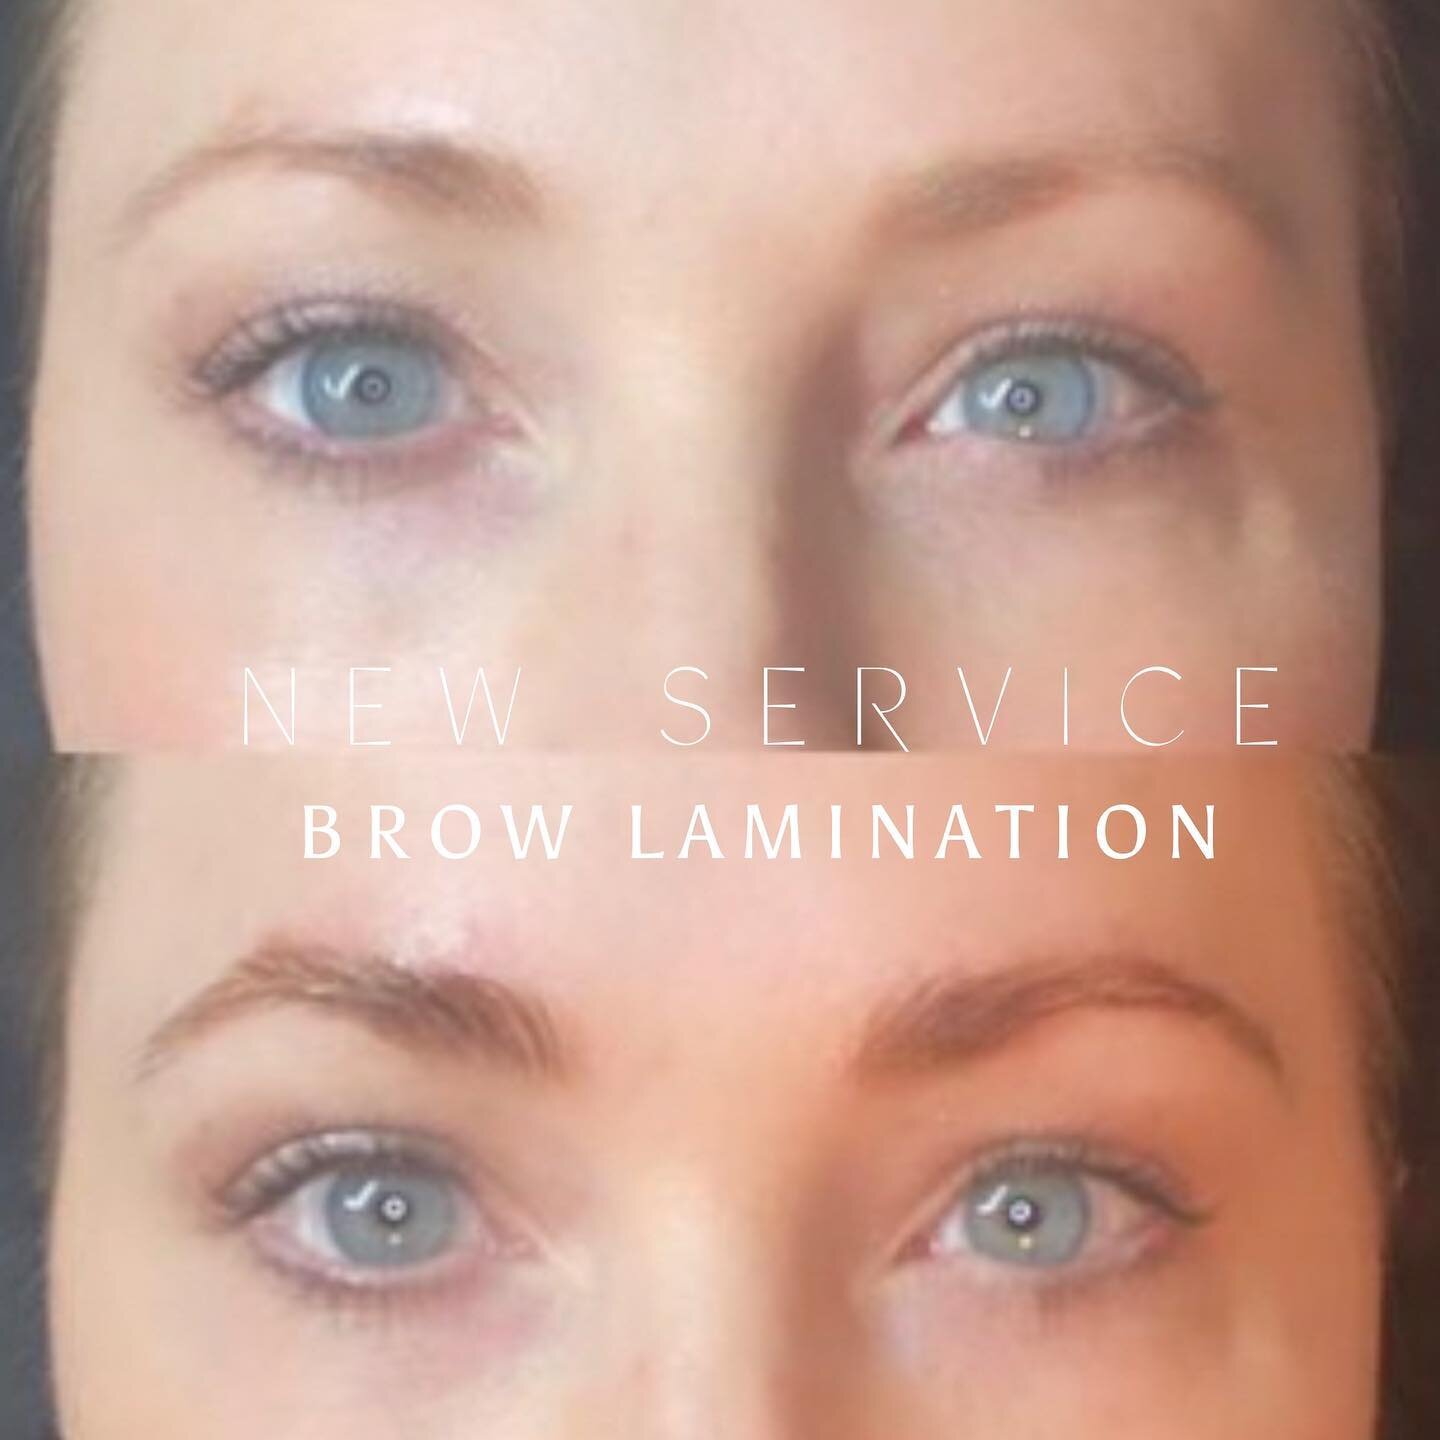 NEW SERVICE  ALERT🚨 
We finally will be offering Brow Lamination + Design at the Studio! 🙌🏼

This service is just like the lash lift but for your brows. Brow Lam will perm your brow hairs into place making them appear fuller and more defined. The 